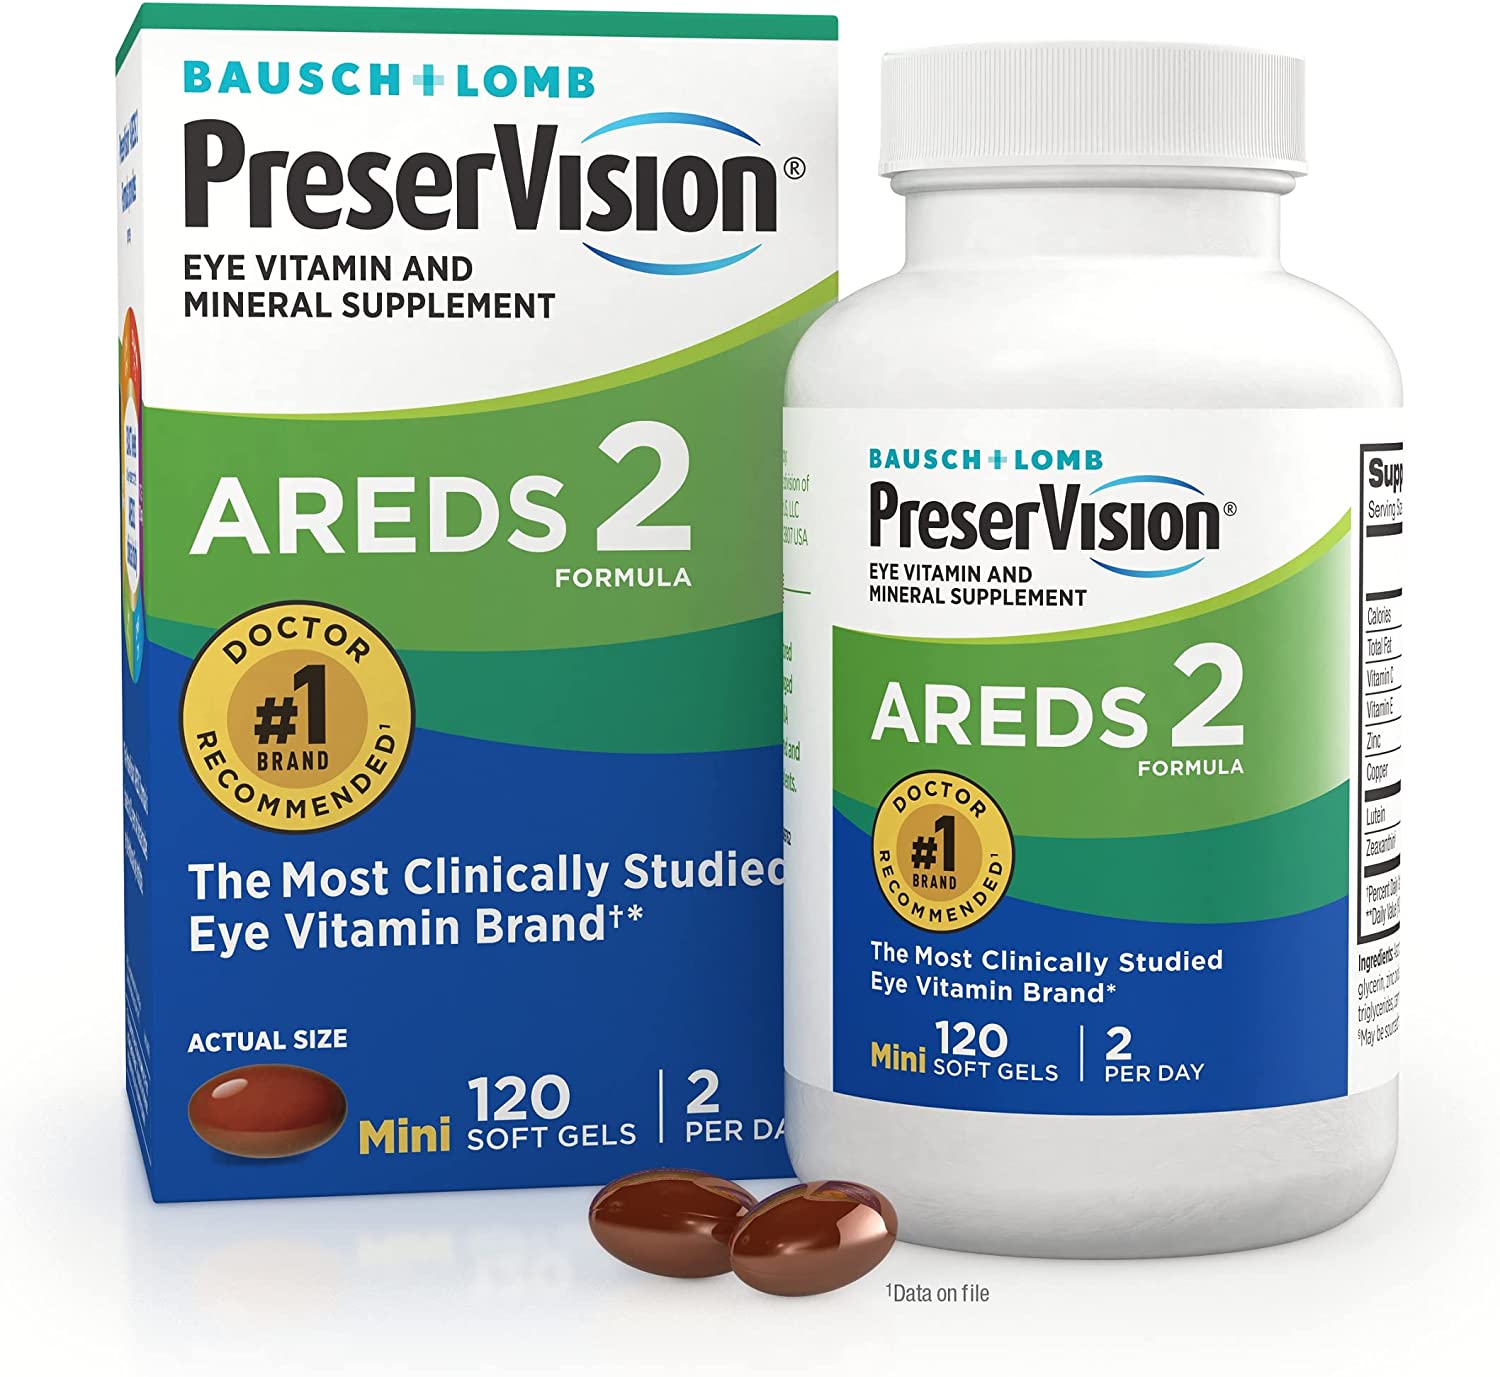 Review of PreserVision AREDS 2 Eye Vitamin & Mineral Supplement